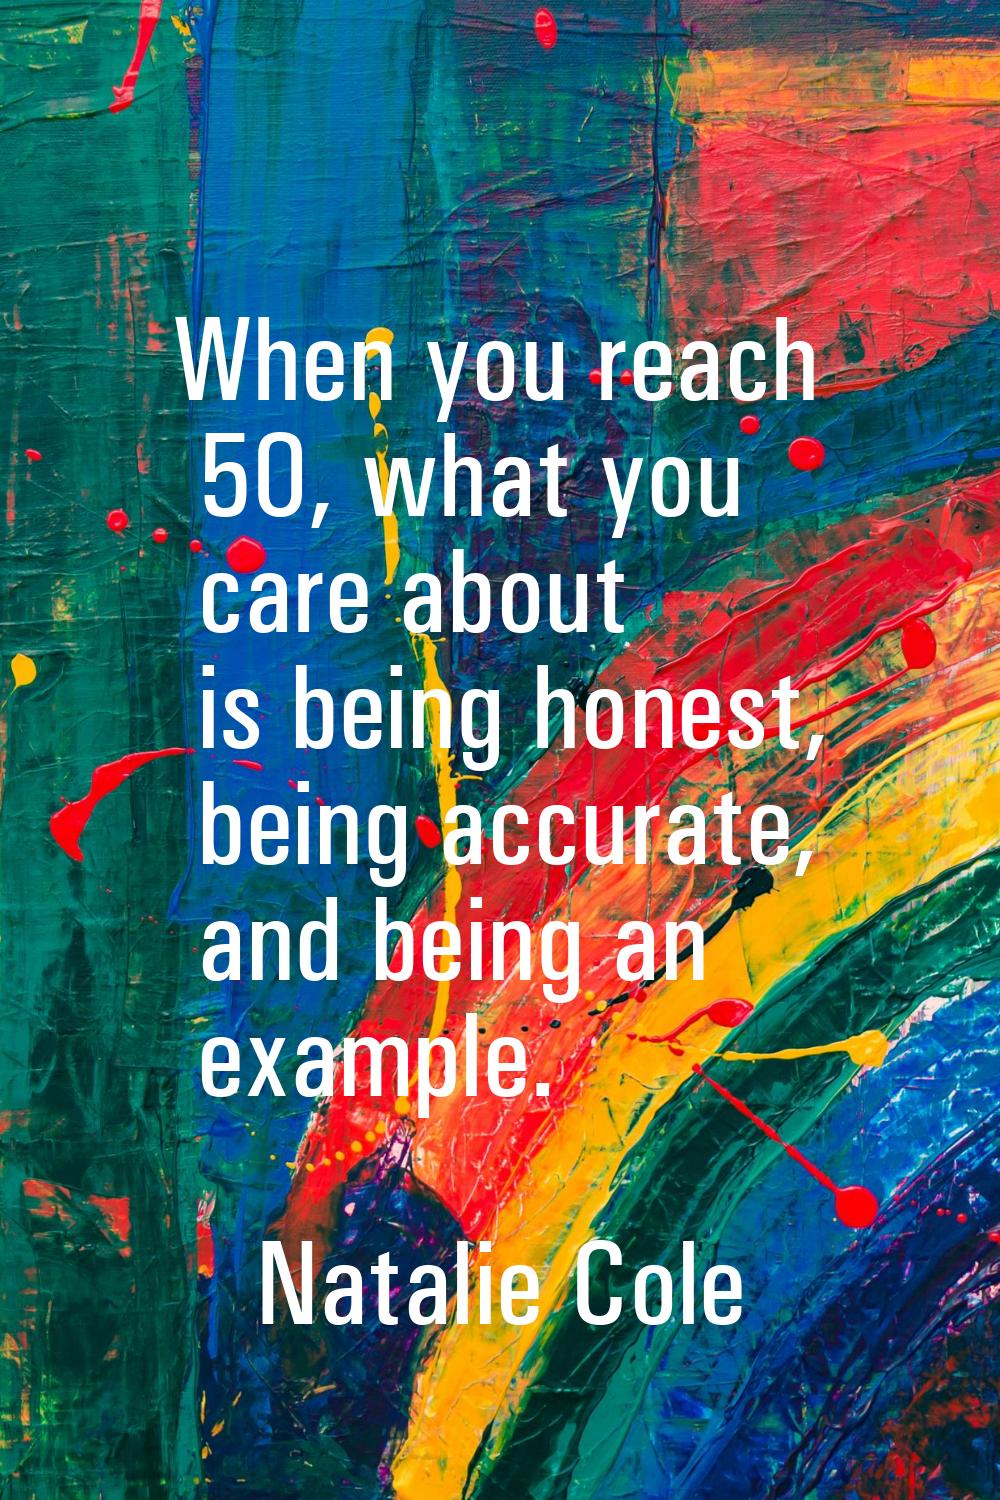 When you reach 50, what you care about is being honest, being accurate, and being an example.